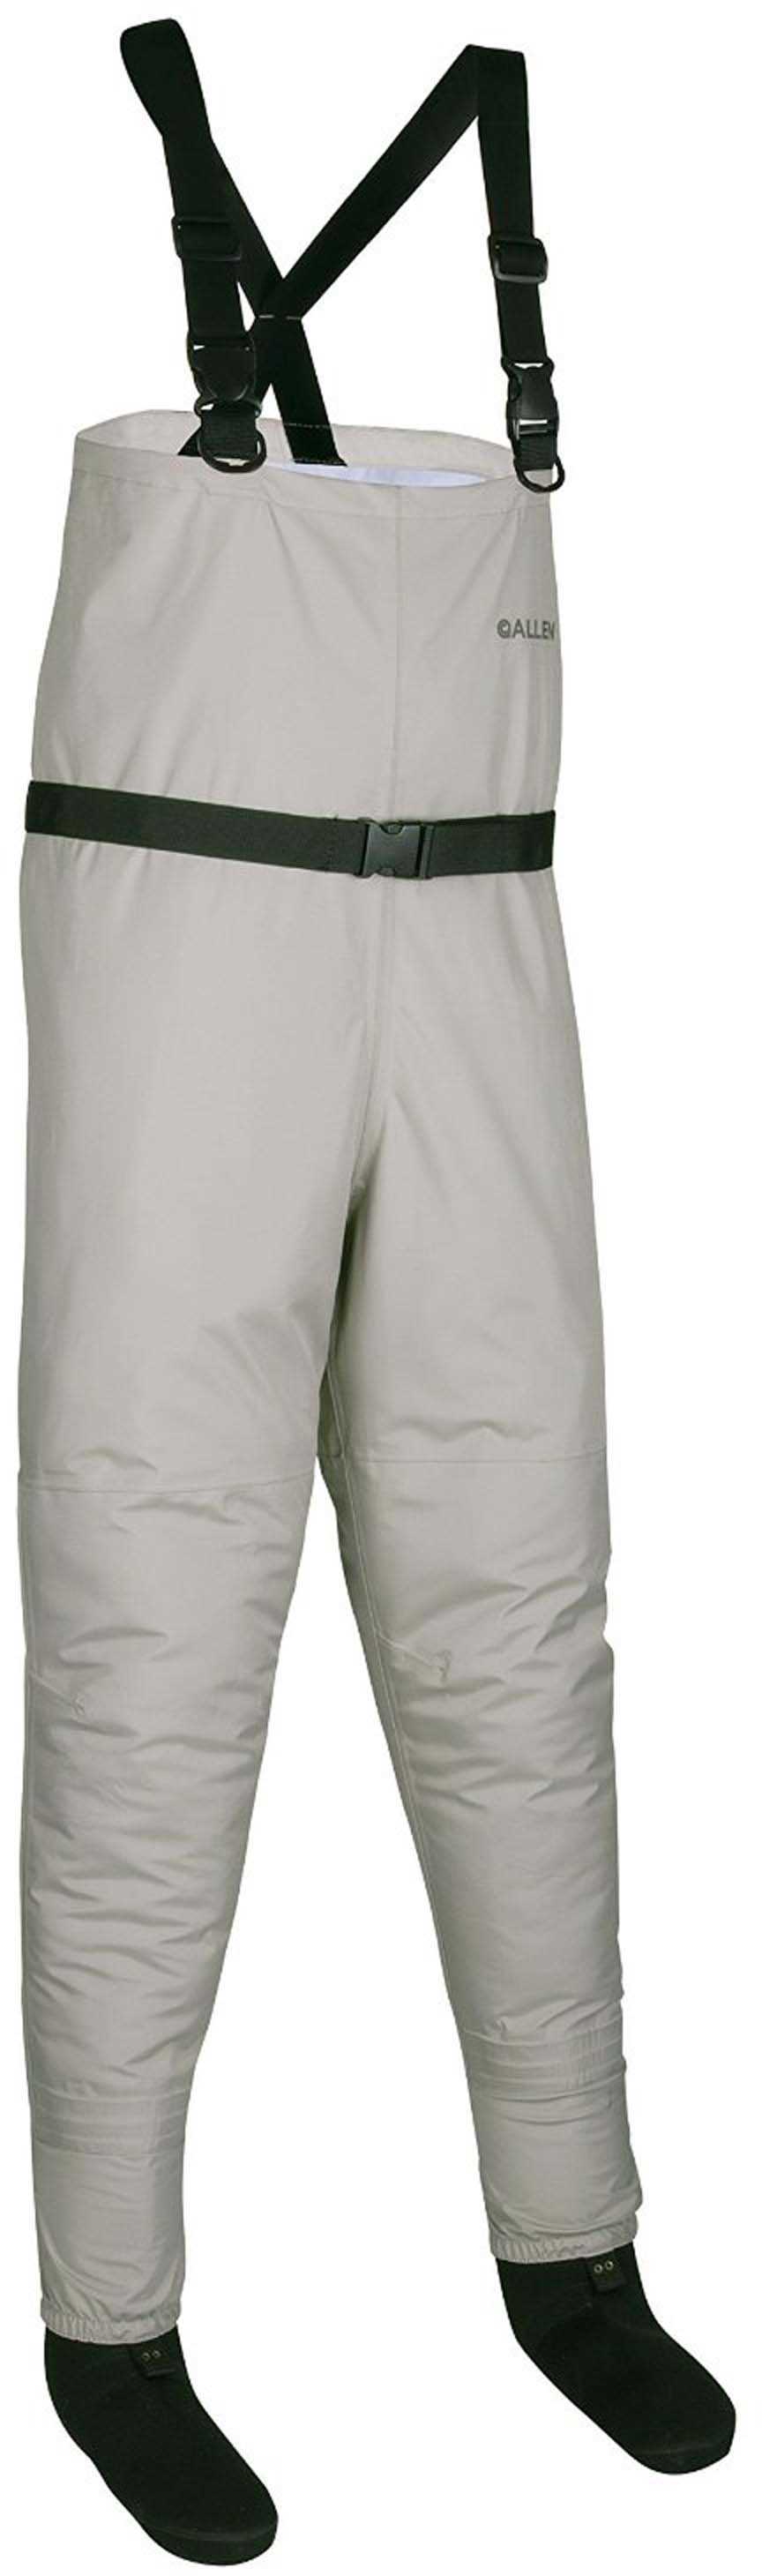 Allen Cases Antero Breathable Stockingfoot Wader-Stout Large Md: 18398